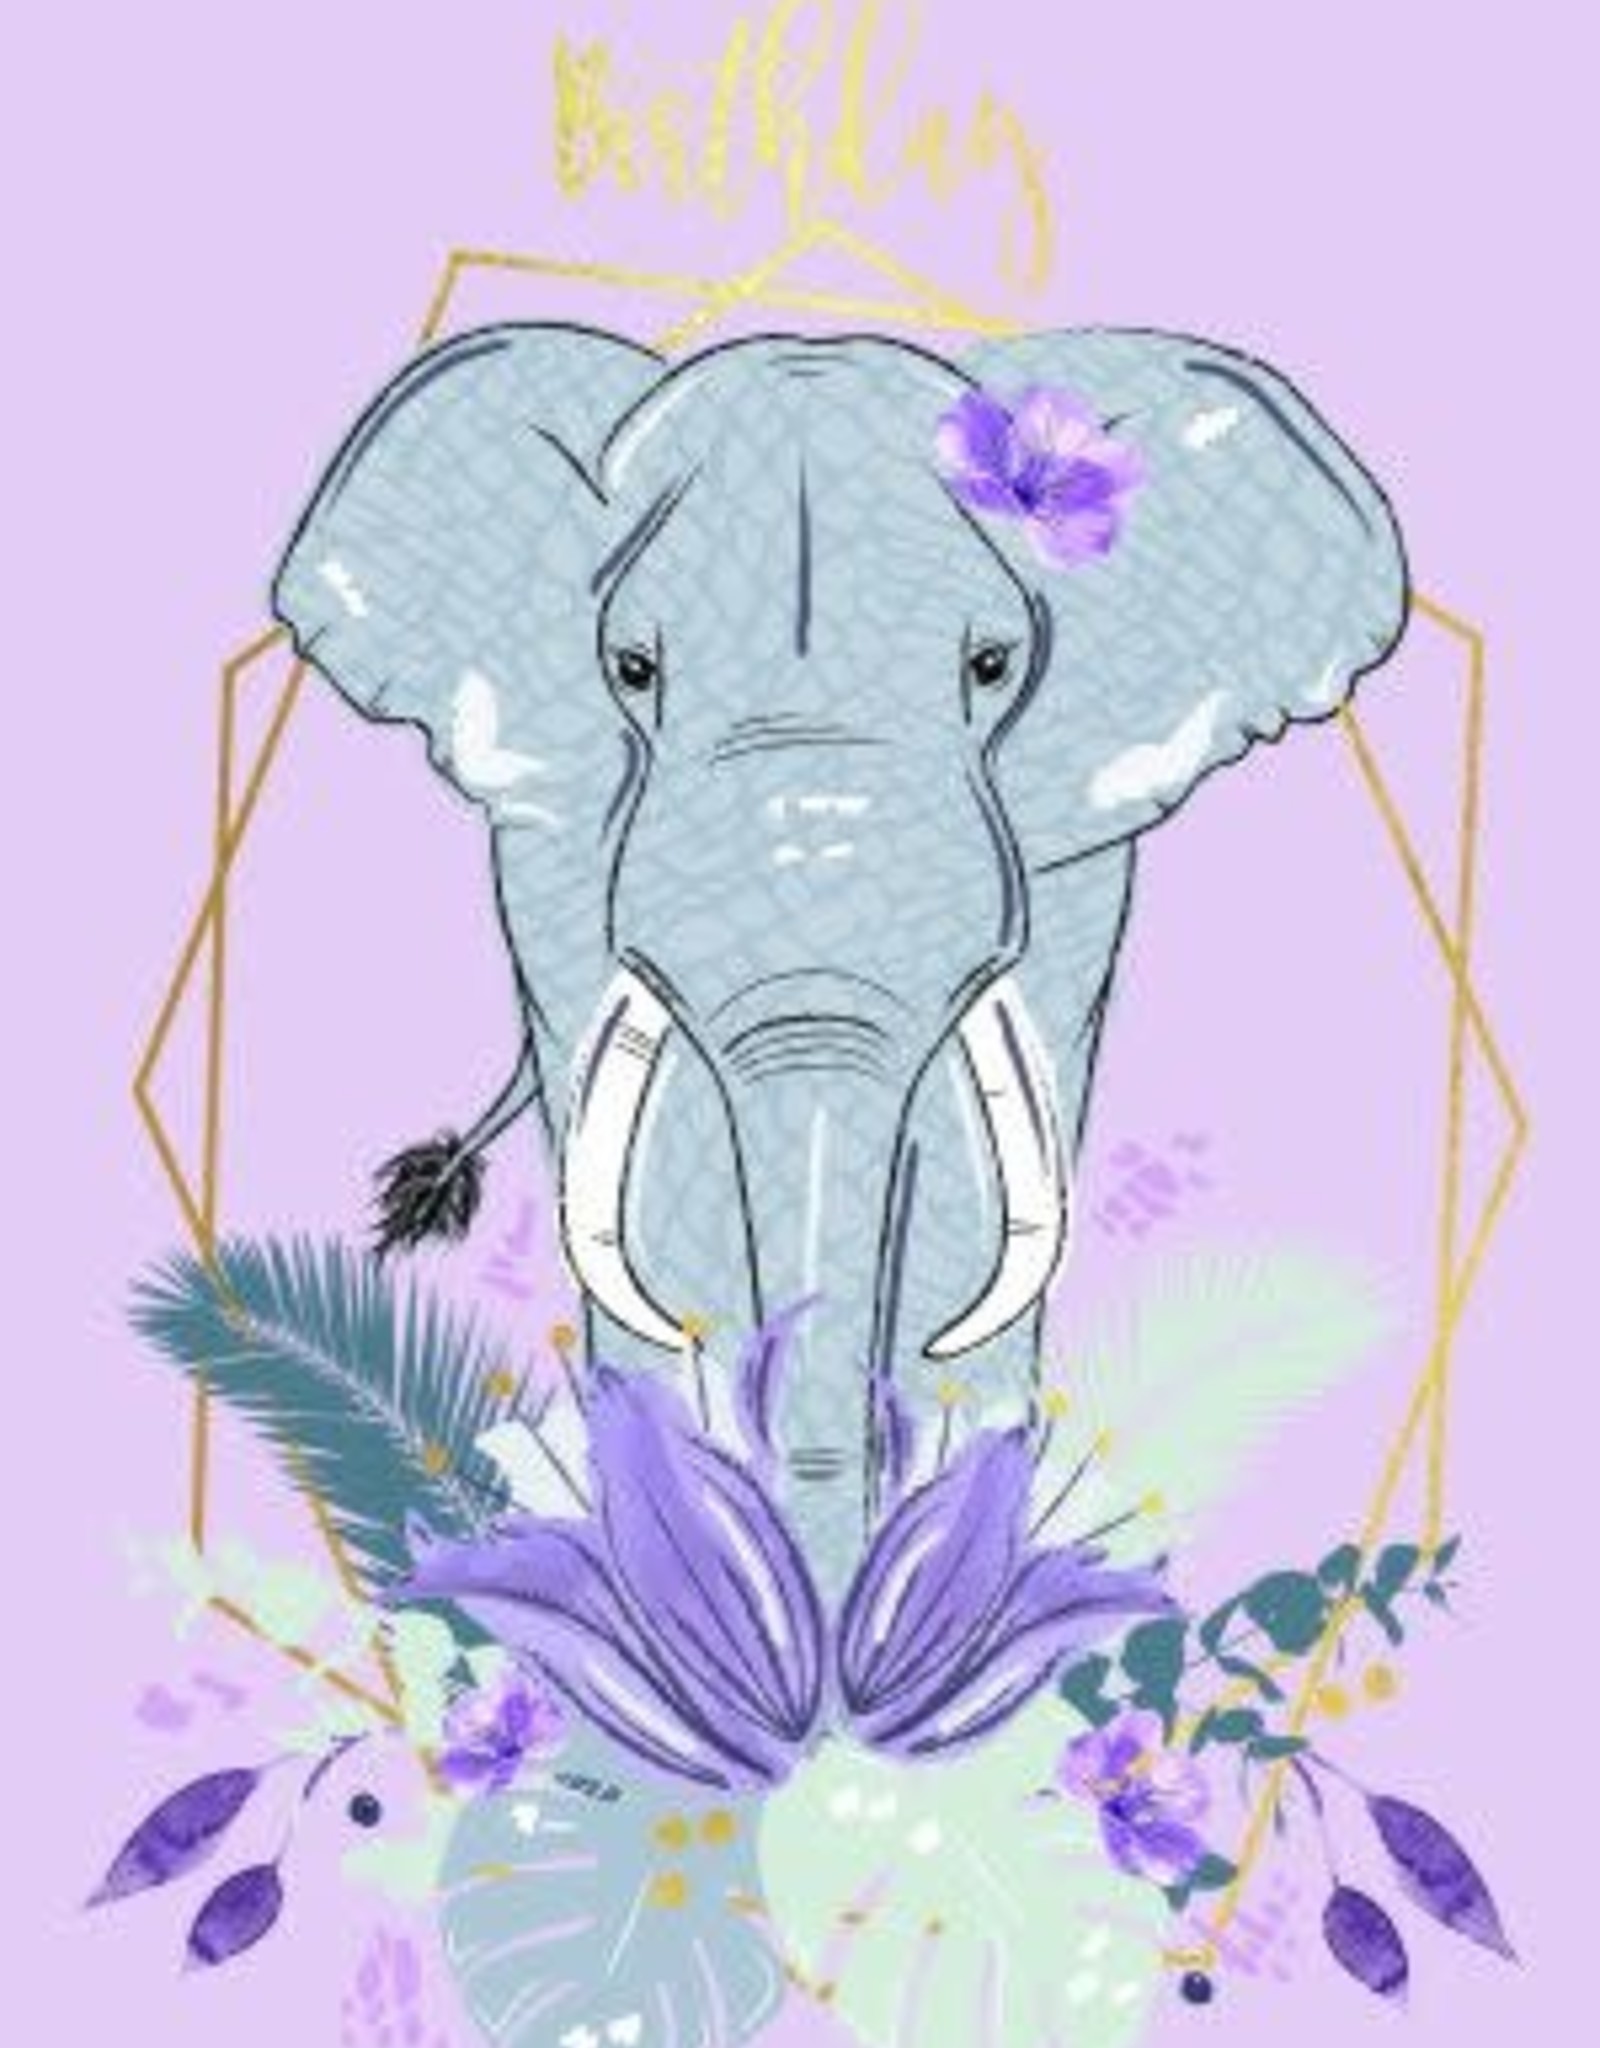 Incognito Royal Palms - Have an unforgettable birthday - Elephant 4.2" x 6.1"